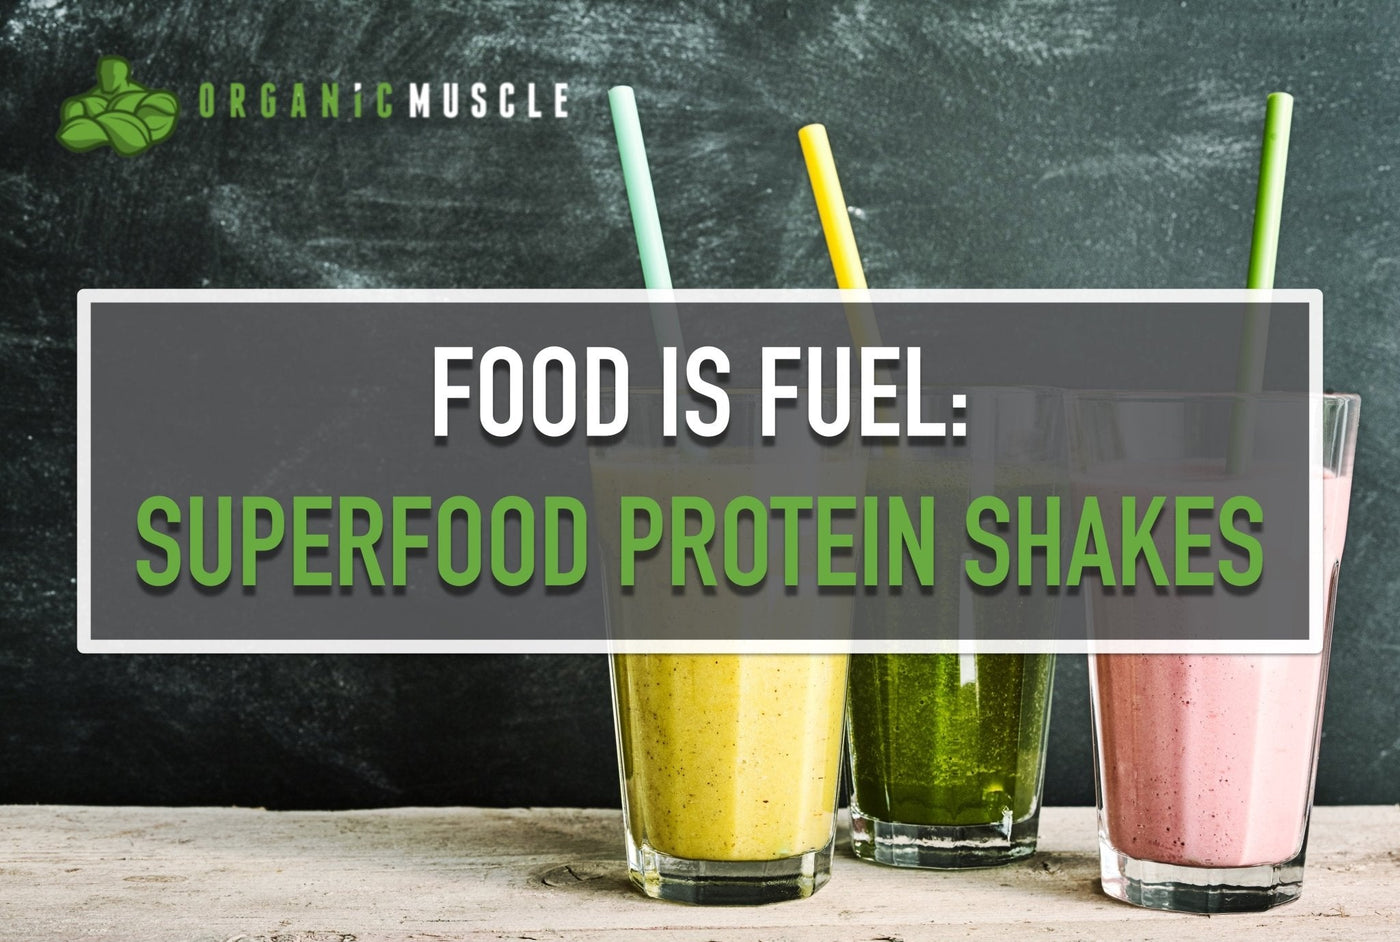 Food Is Fuel: Superfood Protein Shakes - Organic Muscle Fitness Supplements